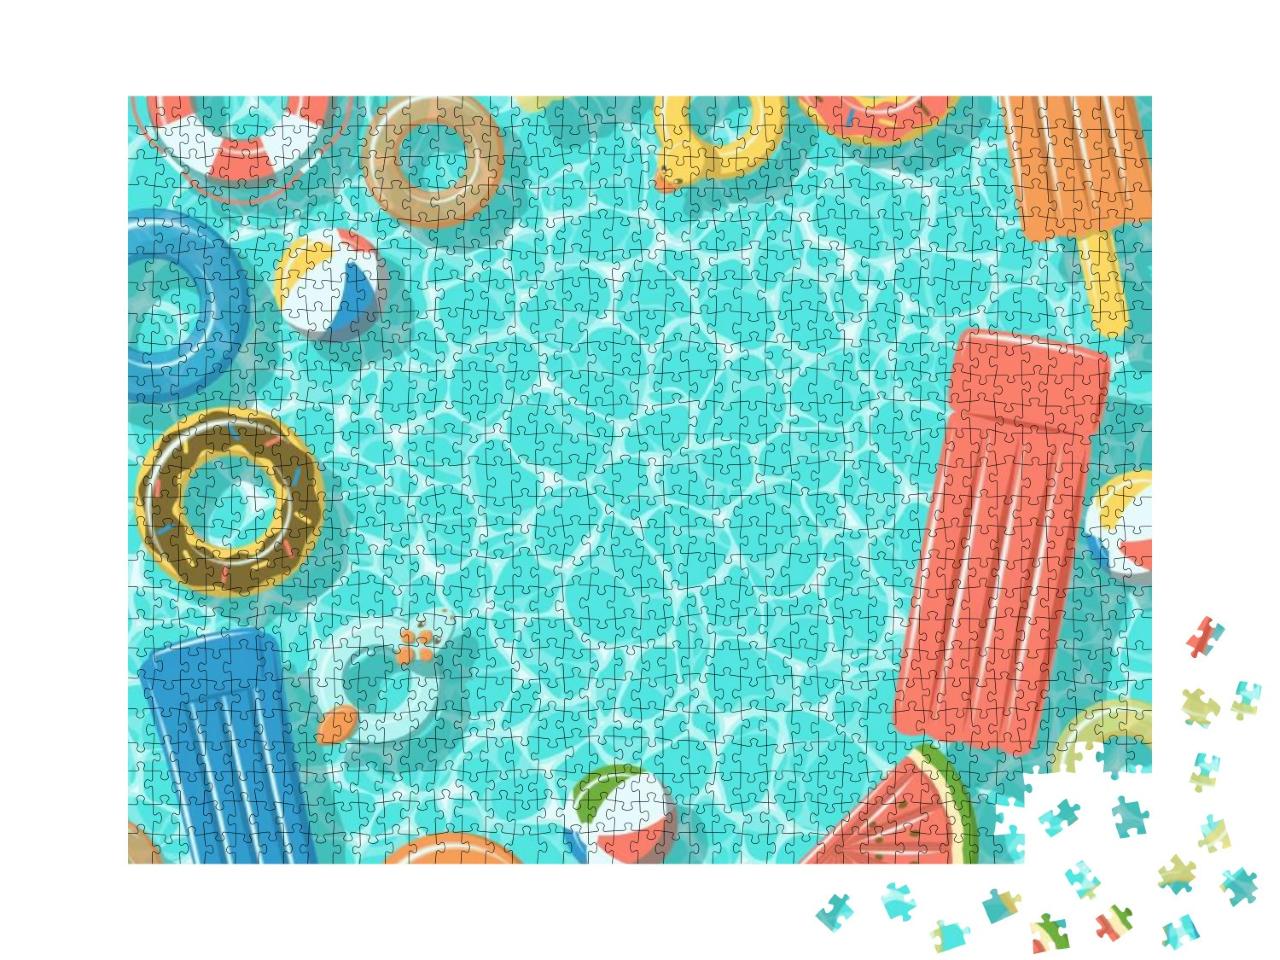 Swimming Pool from Top View with Colorful Inflatable Rubb... Jigsaw Puzzle with 1000 pieces